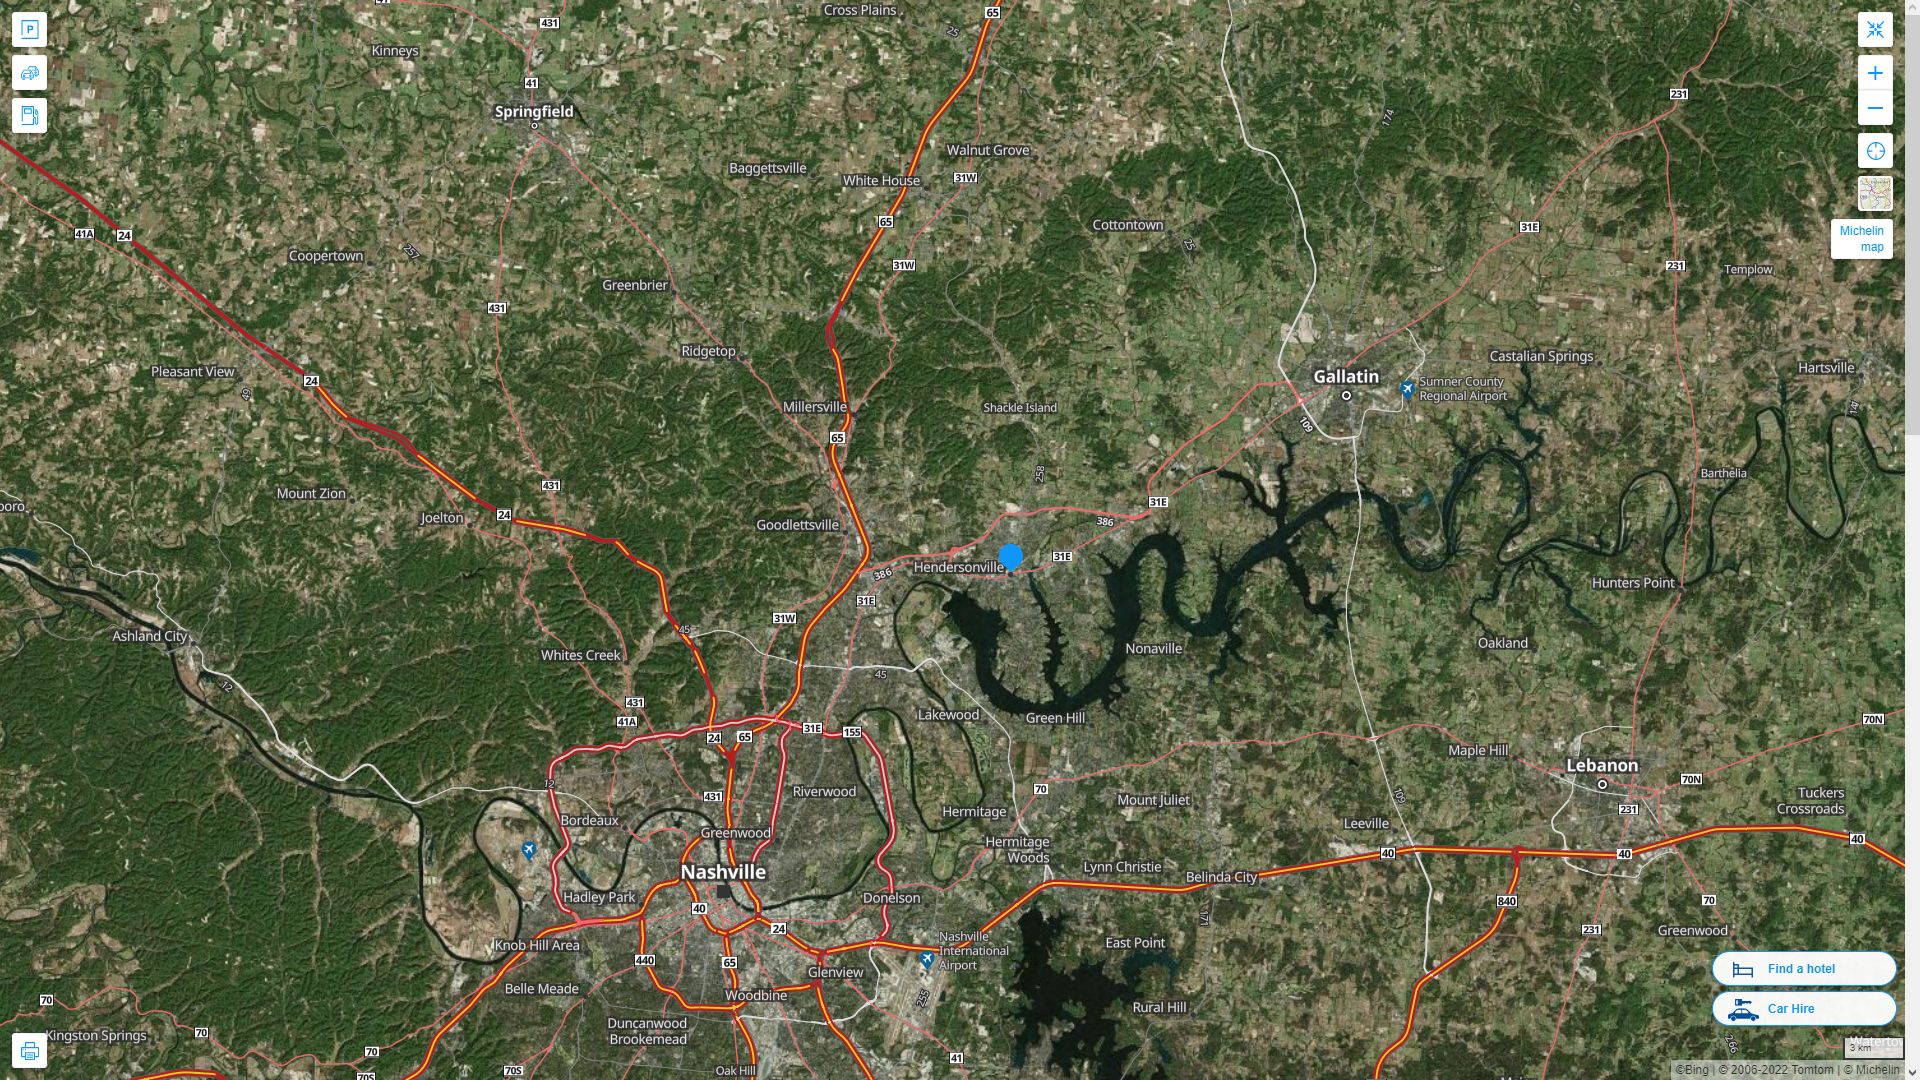 Hendersonville Tennessee Highway and Road Map with Satellite View